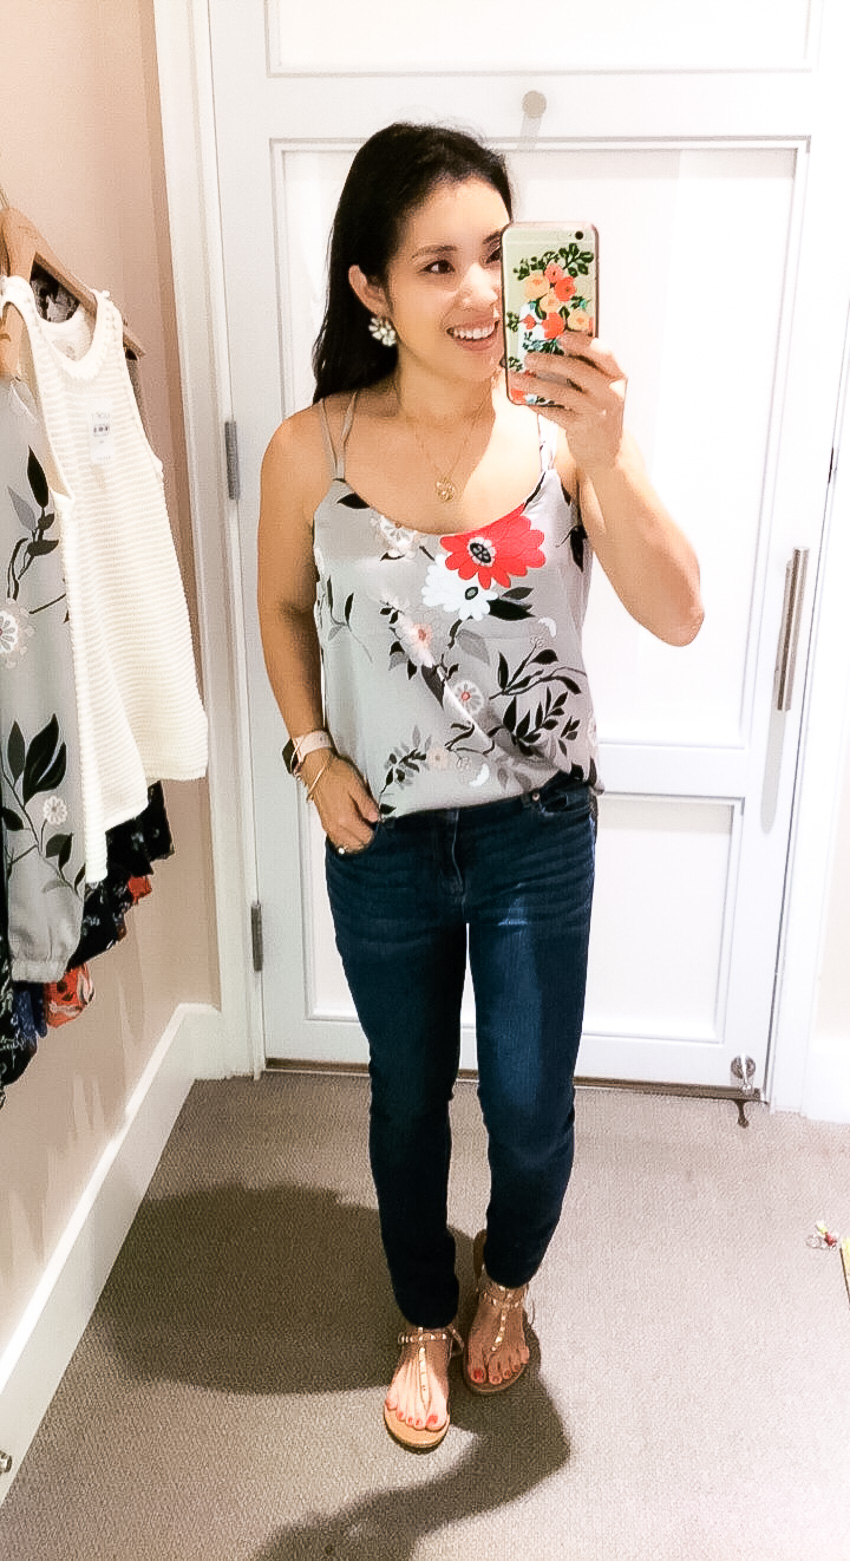 LOFT Sale: Dressing Room Diaries by Dallas fashion blogger cute and little | botanical charmeuse cami | loft dressing room review